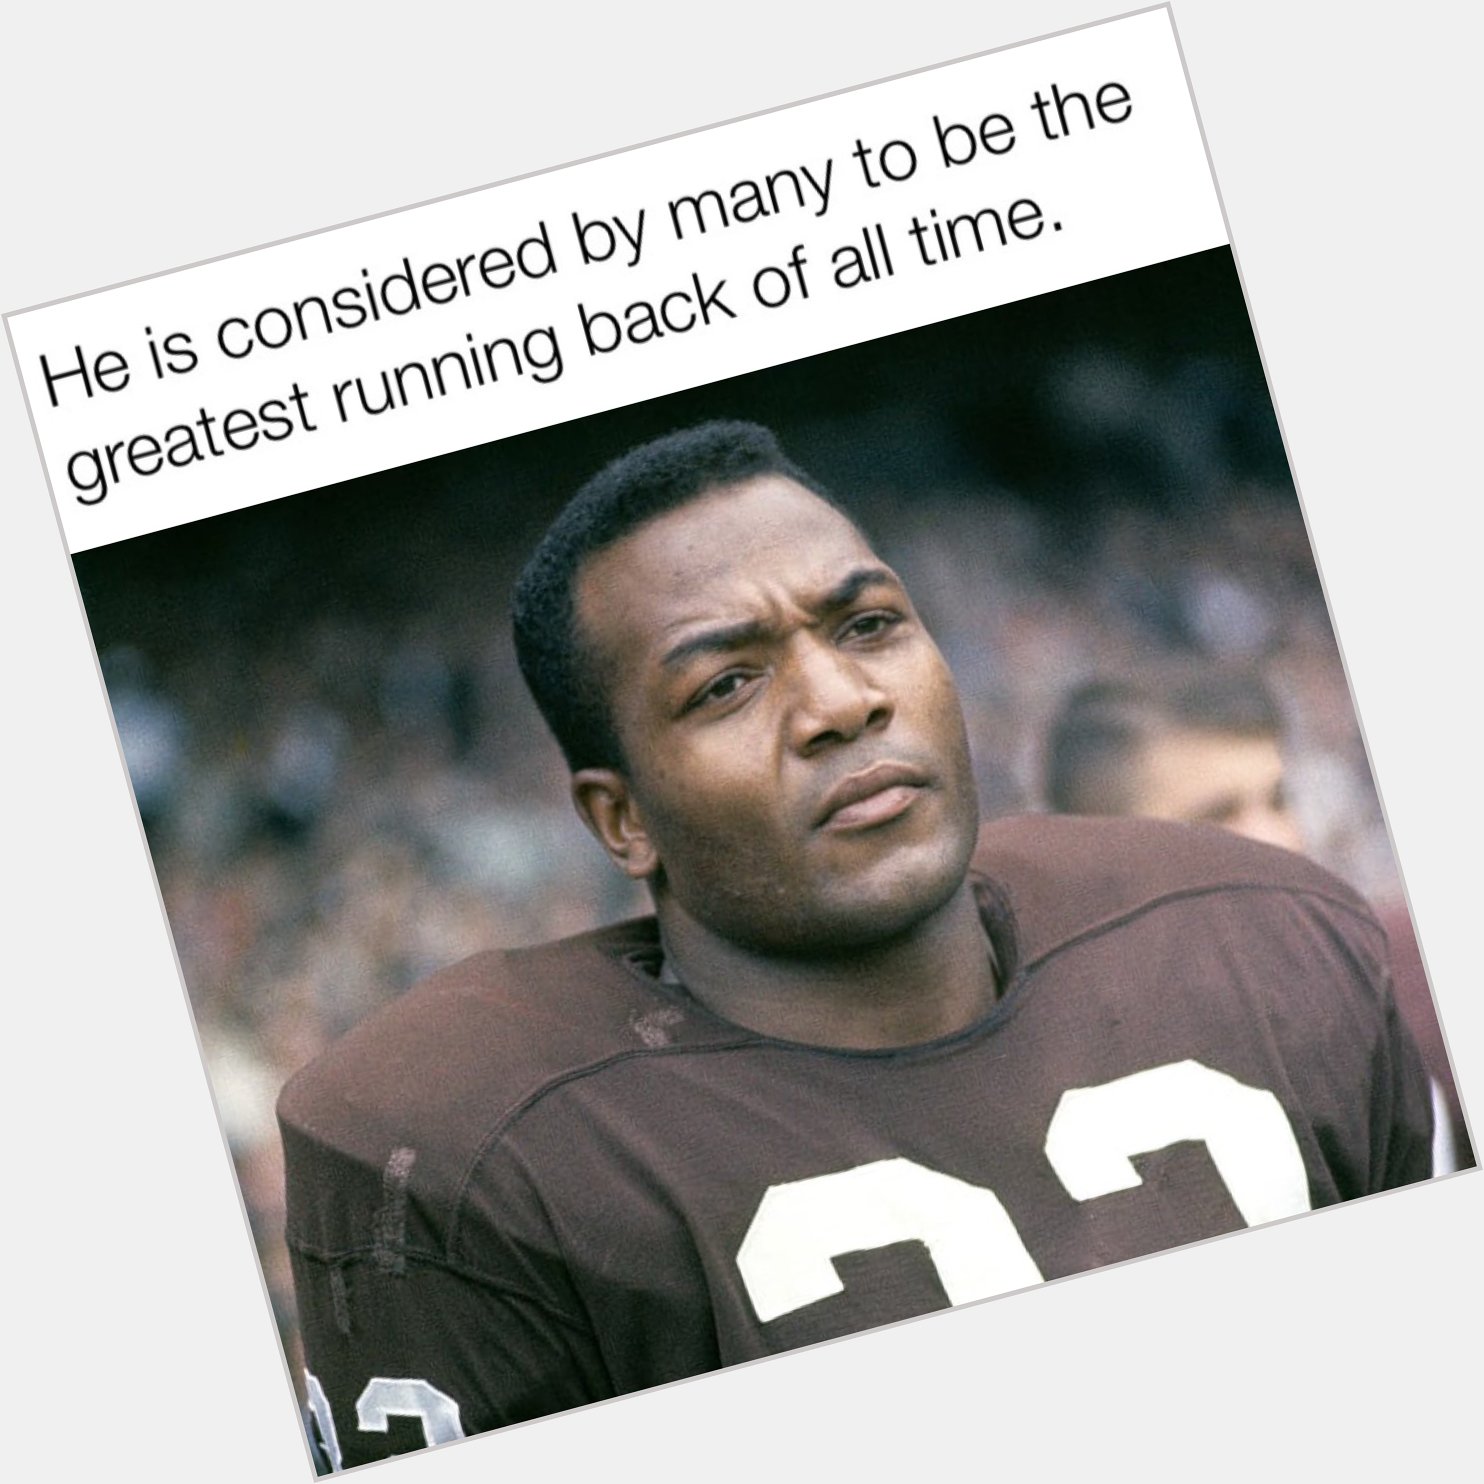 Mankind owes a lot to this man. The Cleveland Browns franchise owes him more. Happy birthday Jim Brown. 